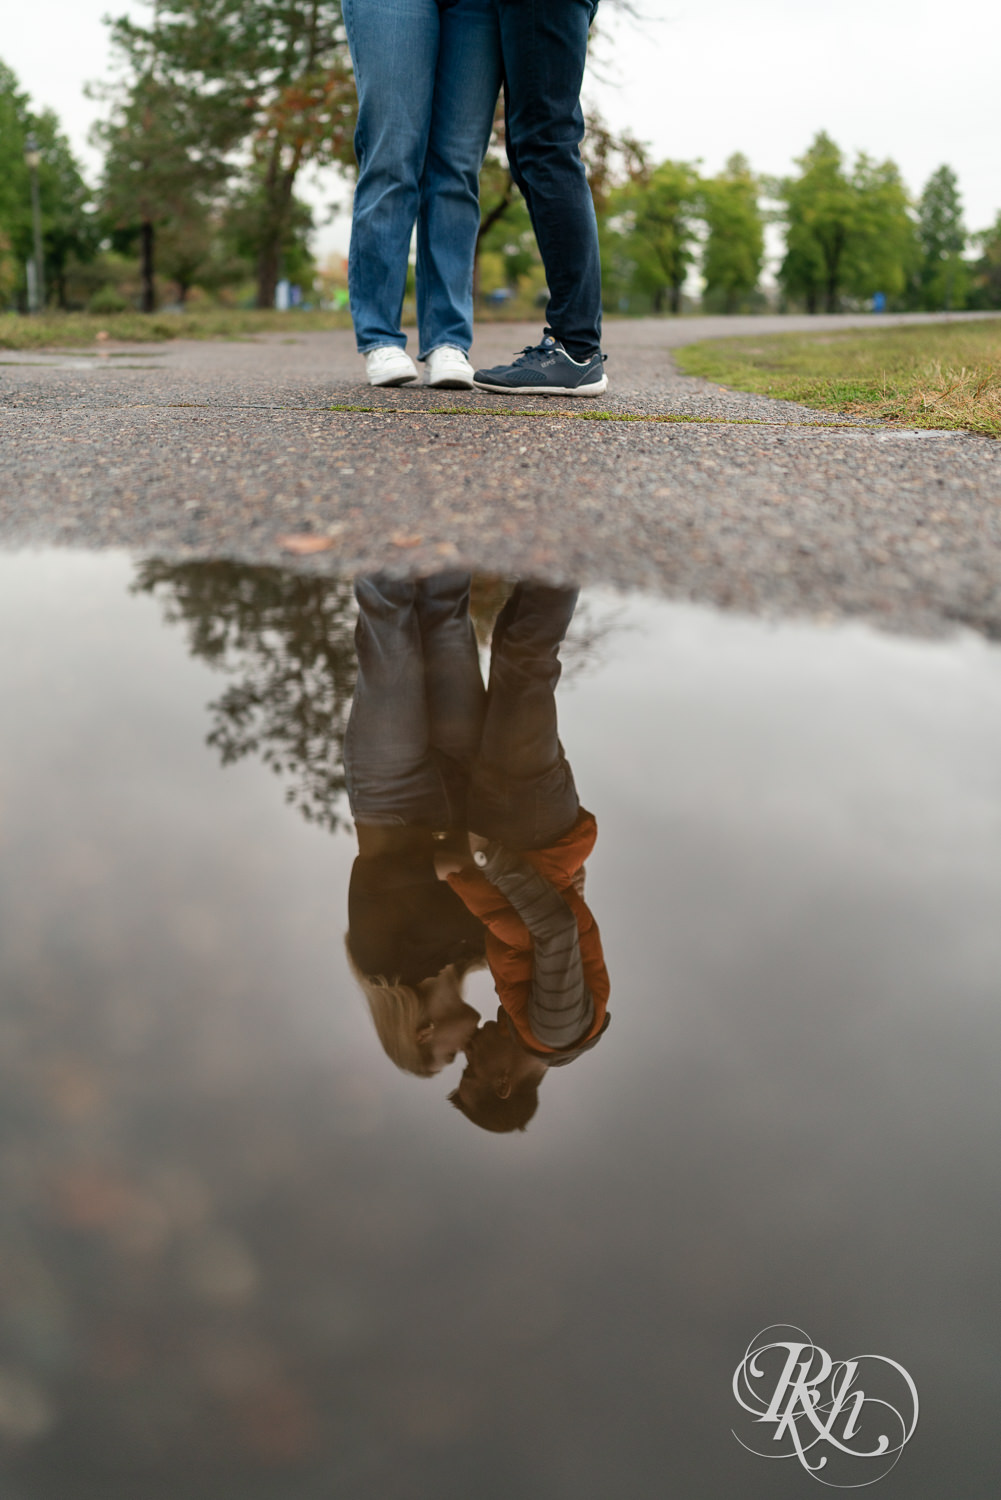 Man and woman in hoodies and jeans kiss during rainy engagement photos at Boom Island Park in Minneapolis, Minnesota.